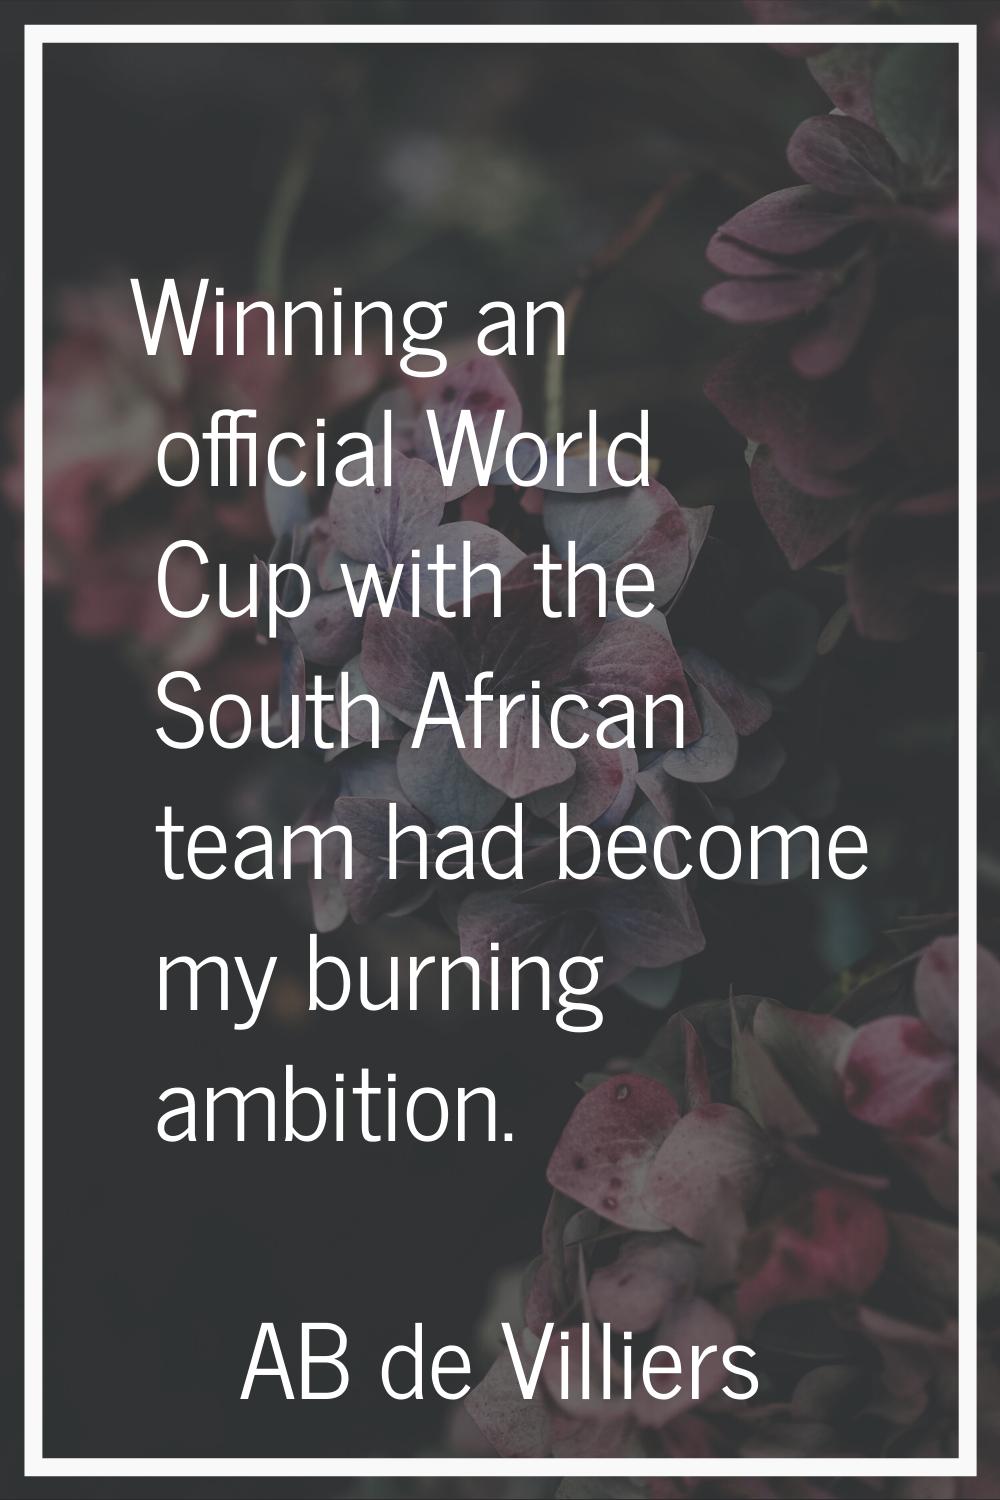 Winning an official World Cup with the South African team had become my burning ambition.